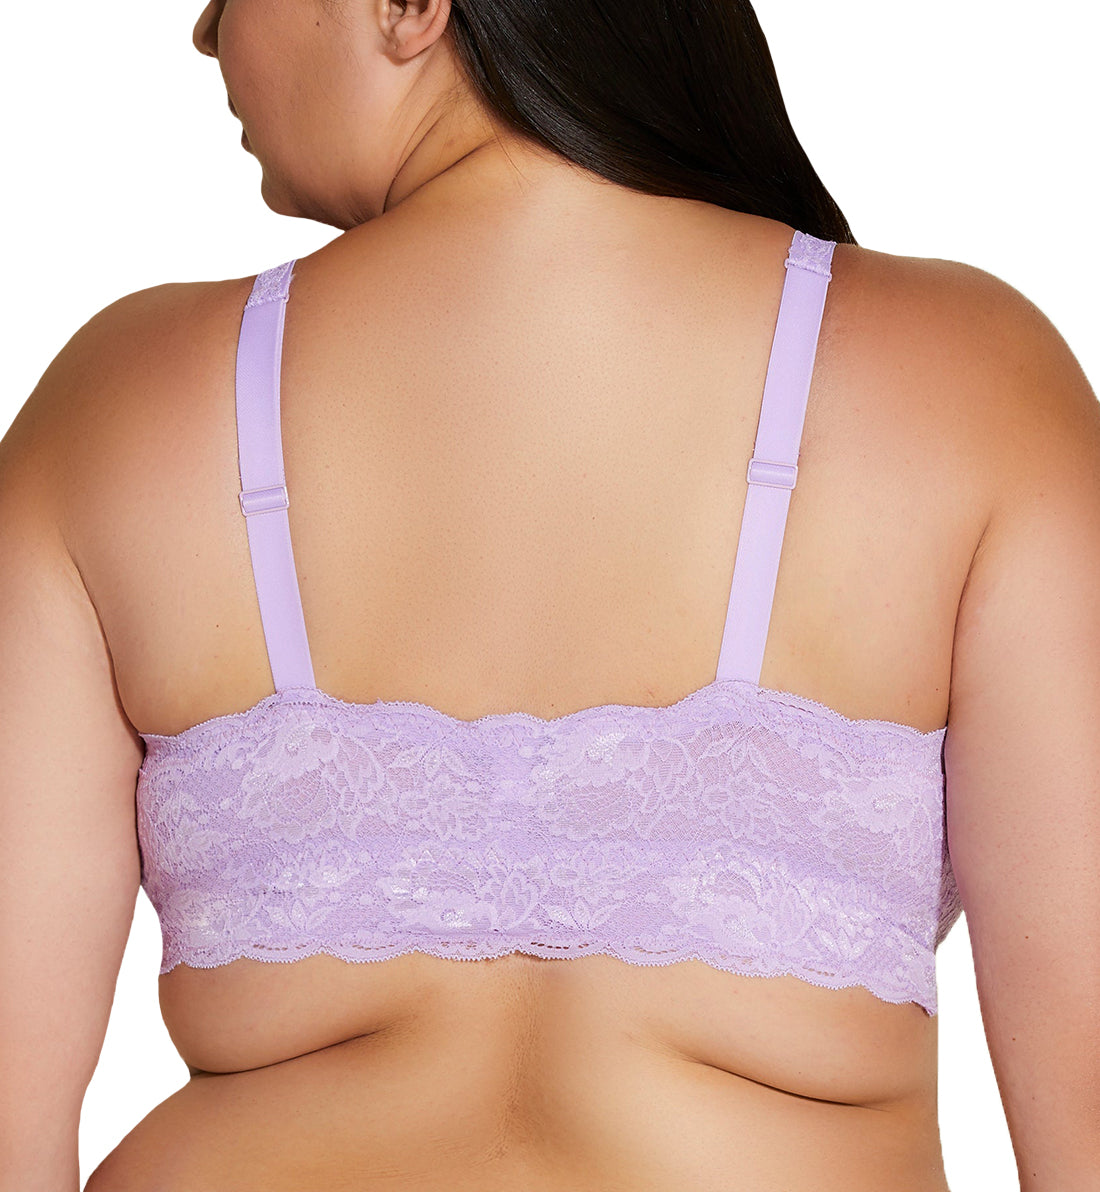 Cosabella NSN ULTRA CURVY Sweetie Bralette (NEVER1321),XS,Icy Violet - Icy Violet,XS